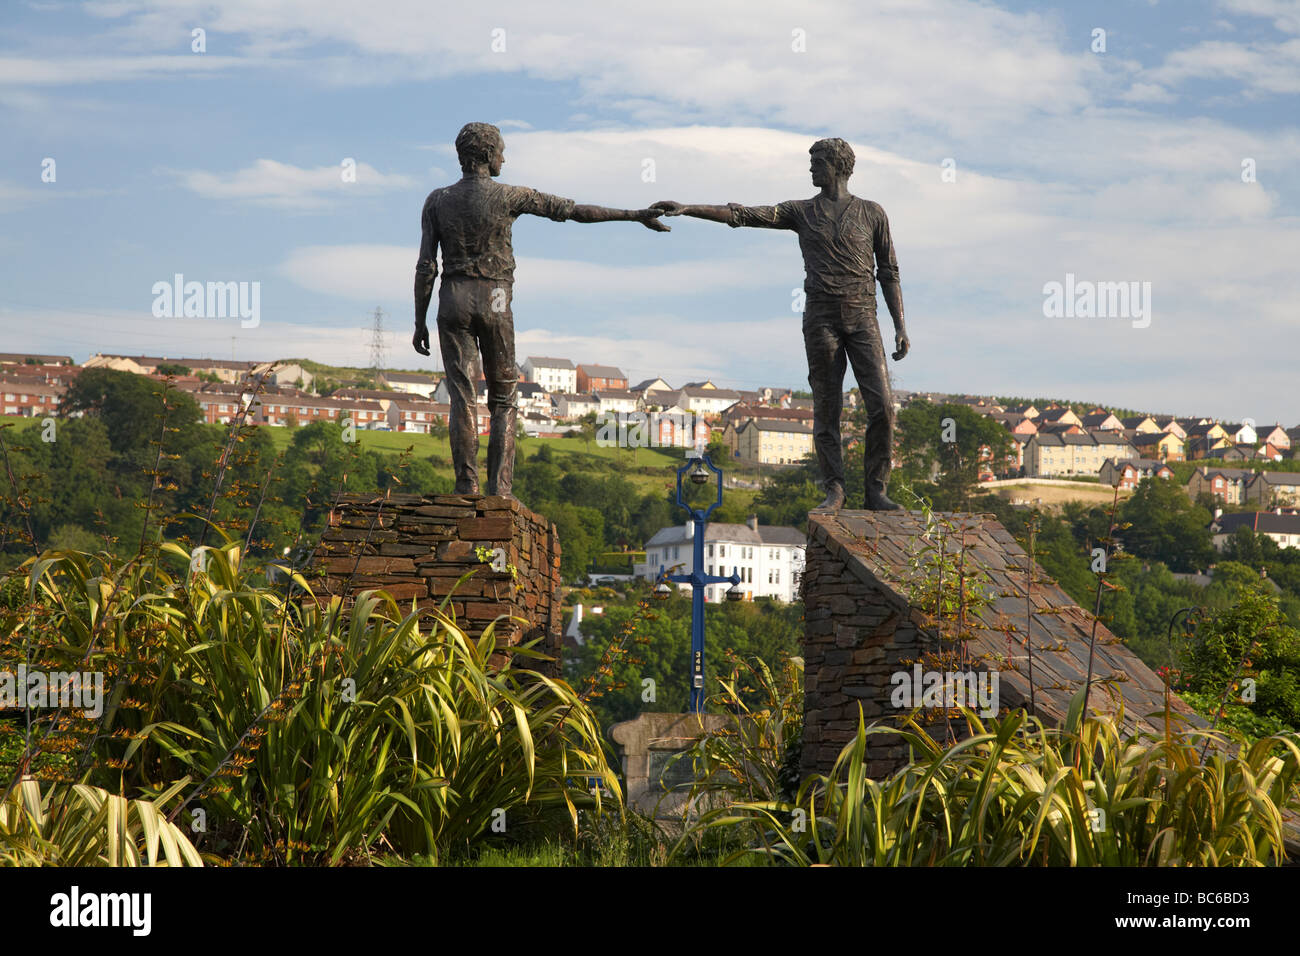 hands across the divide sculpture by maurice harron in derry city county londonderry northern ireland uk Stock Photo